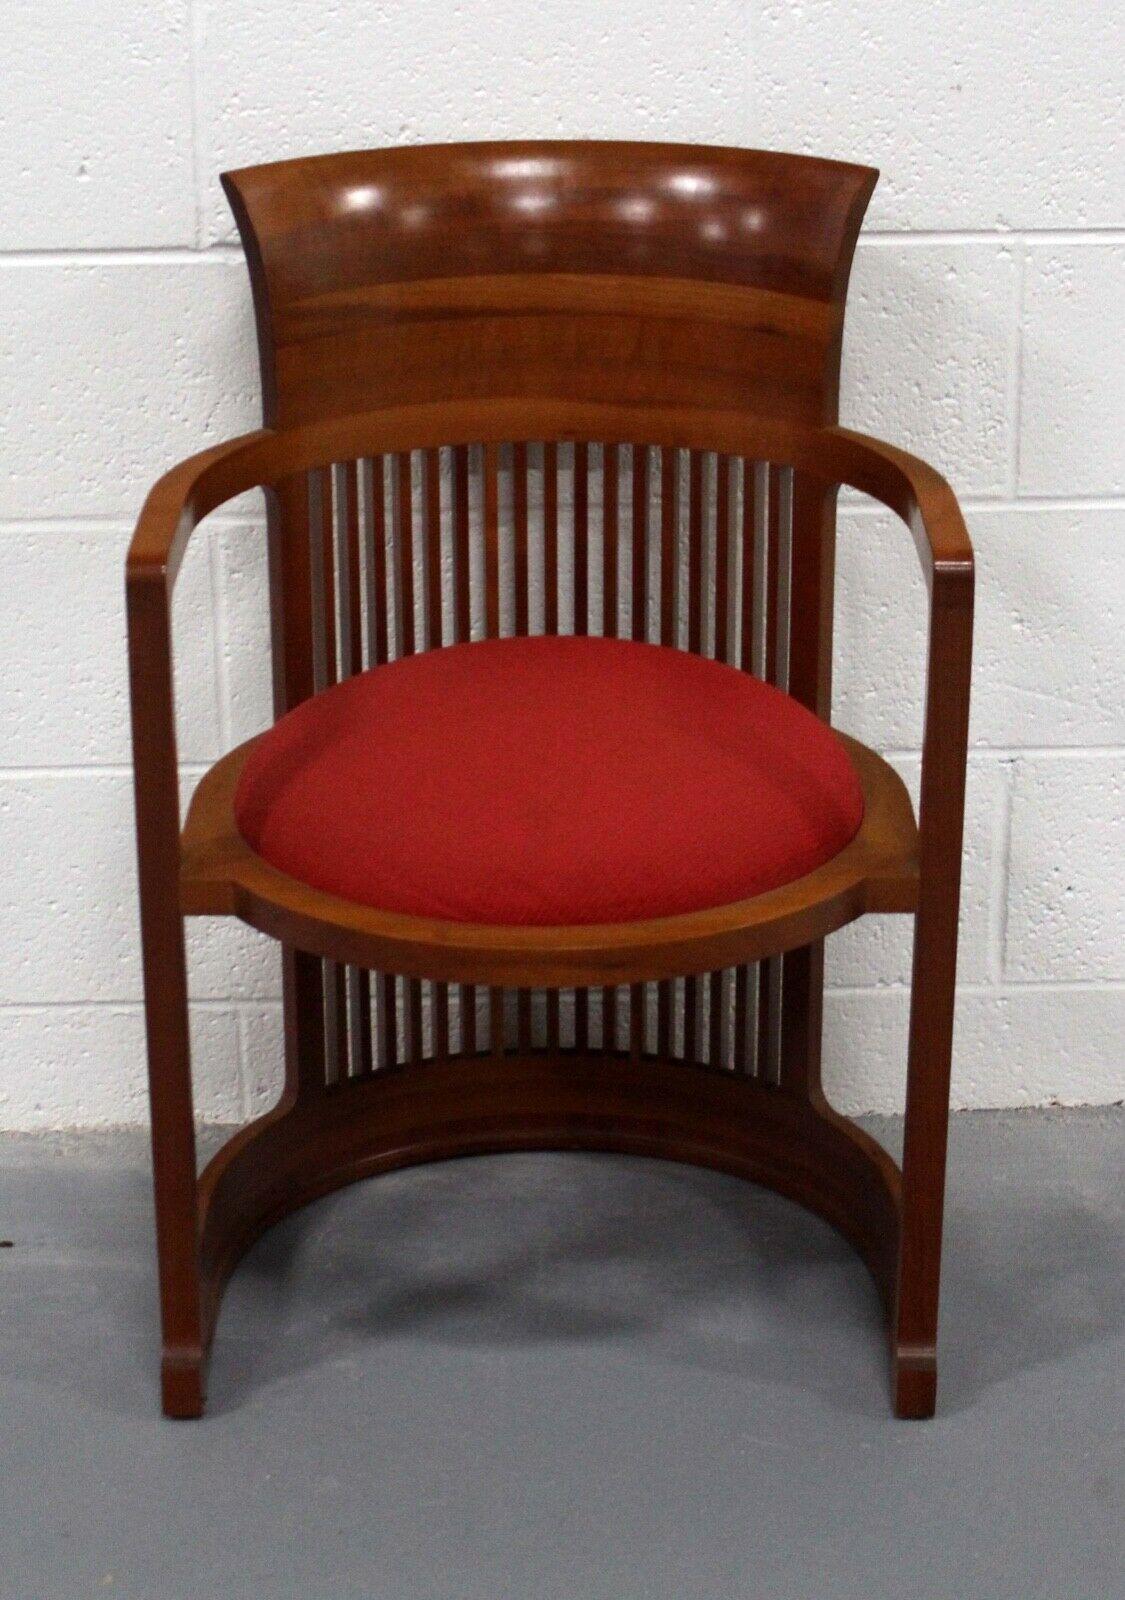 From Le Shoppe Too in Michigan comes this iconic Frank Lloyd Wright Arts & Crafts or Prairie style barrel chair. In the traditional Mission style, this accent chair also known as the 'Taliesin' is made of cherry wood with a comfortable, upholstered